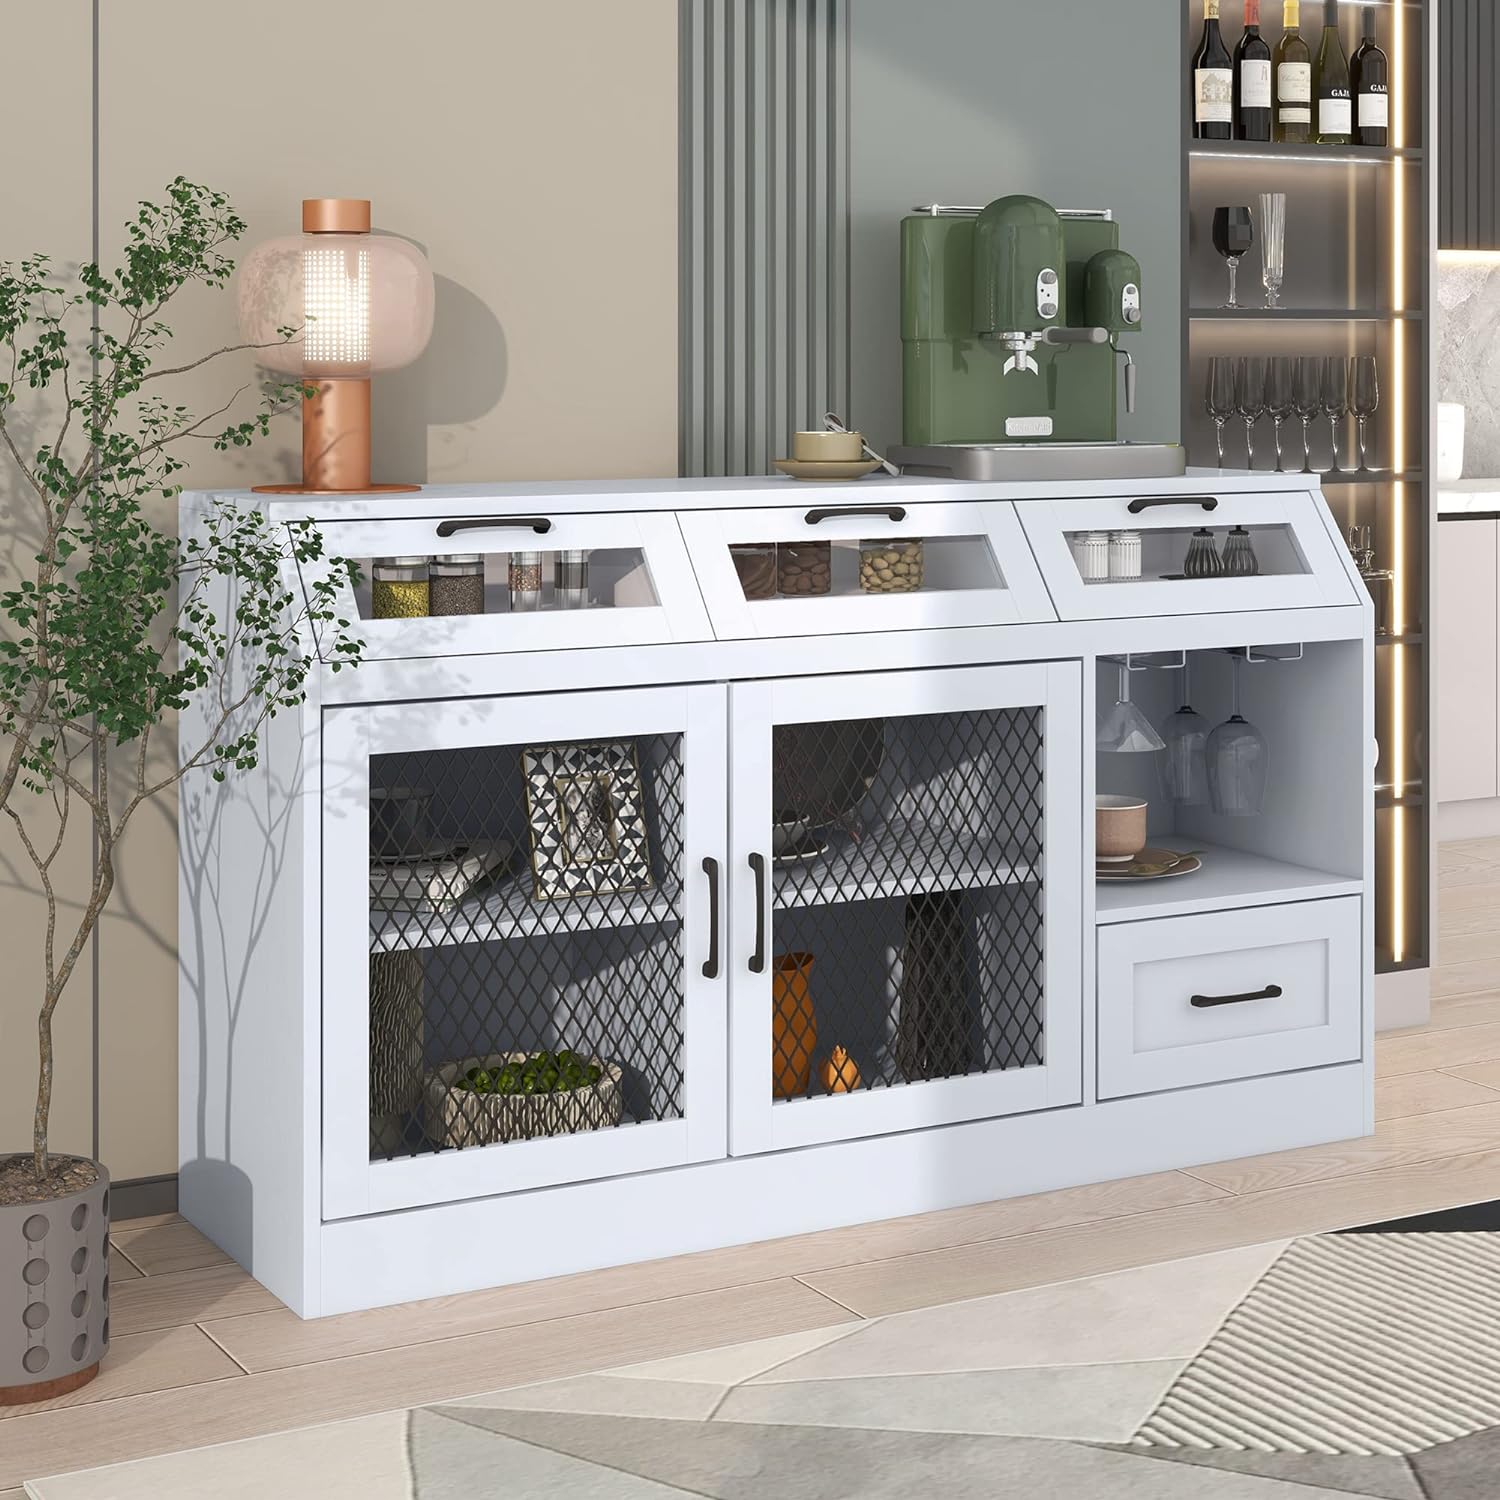 WILLIAMSPACE 54 Sideboard Buffet Cabinet, Kitchen Sideboard Multifunctional Buffet Cabinet with 4 Drawers, Mesh Metal Doors with Adjustable Shelves and Wineglass Holders - White